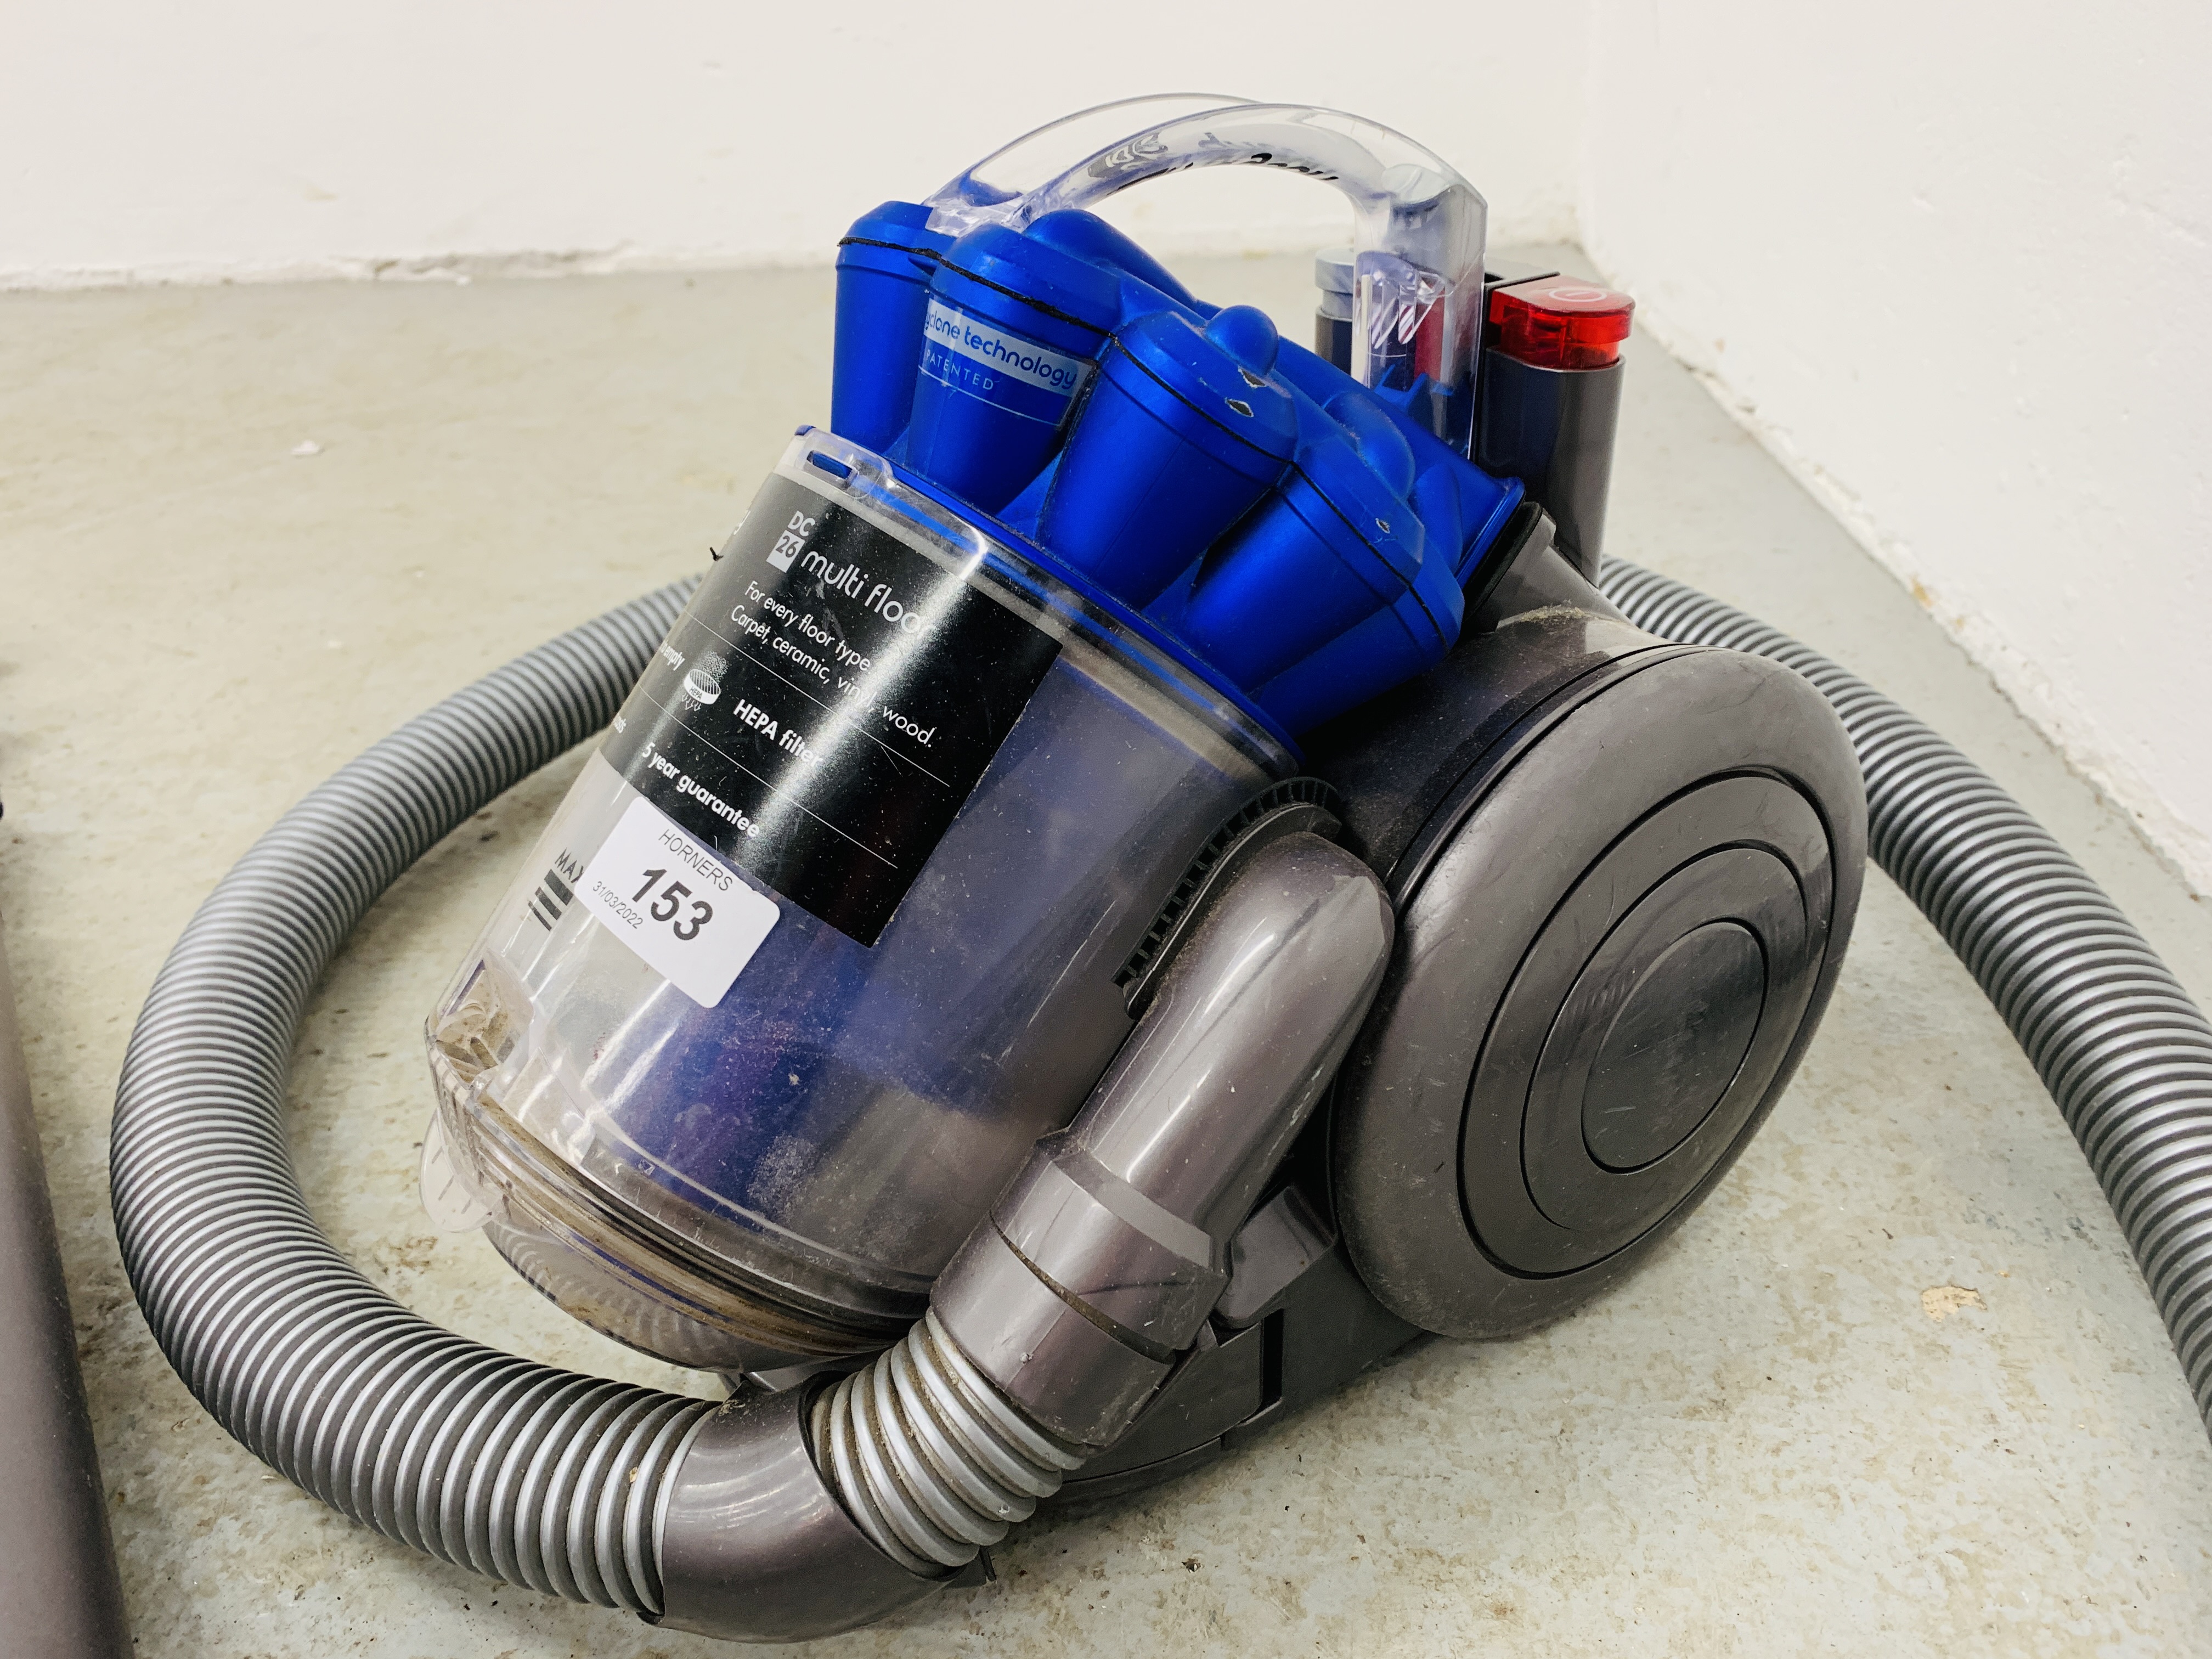 A DYSON DC26 COMPACT VACUUM CLEANER - SOLD AS SEEN. - Image 4 of 7